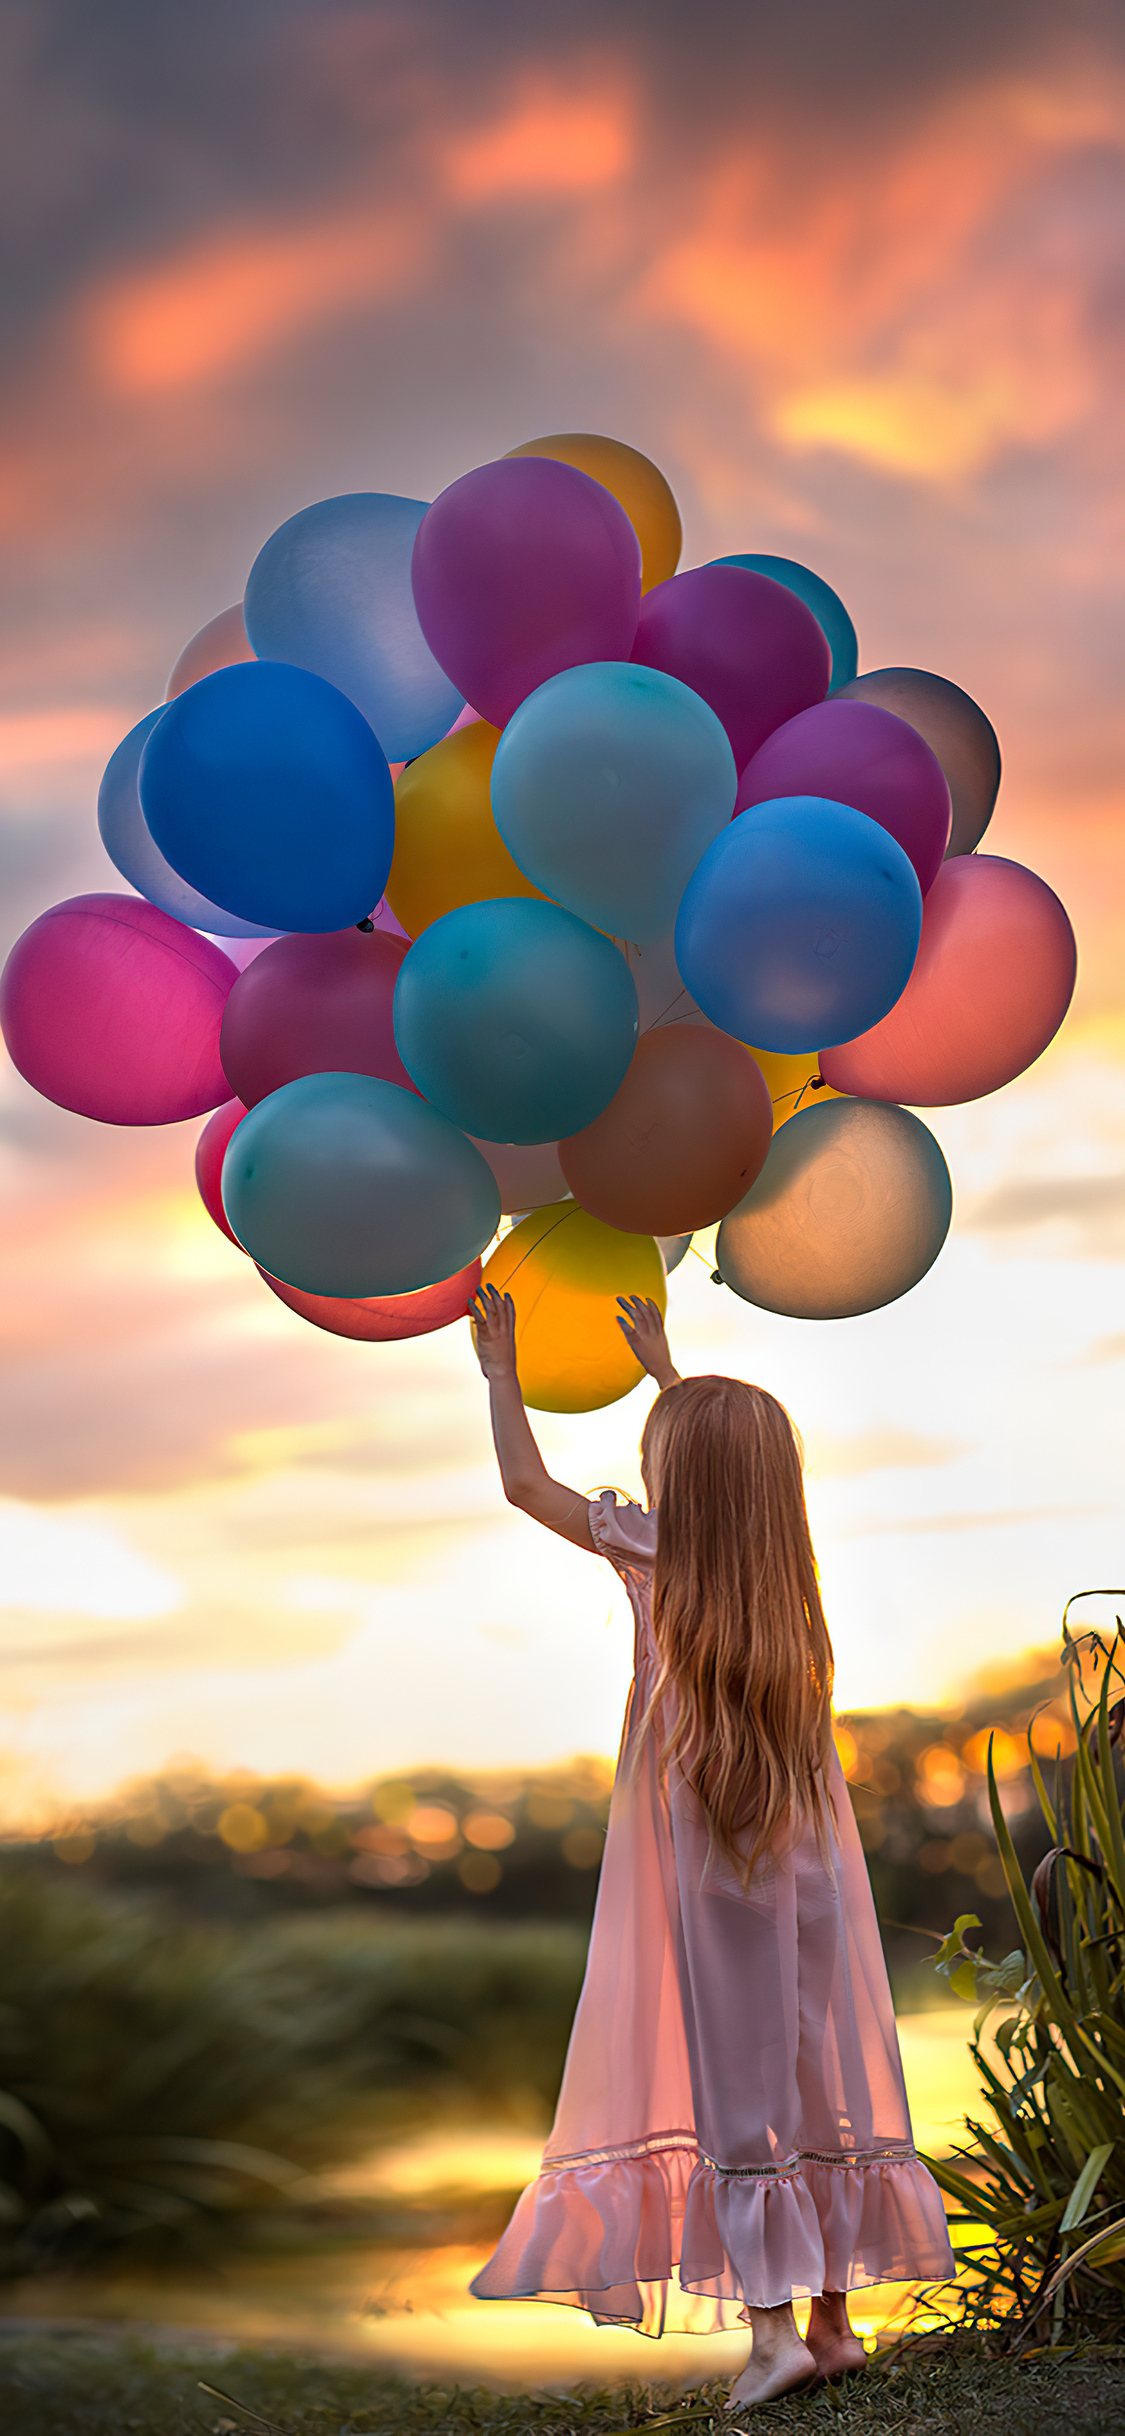 little-girl-with-colorful-balloons-tp.jpg